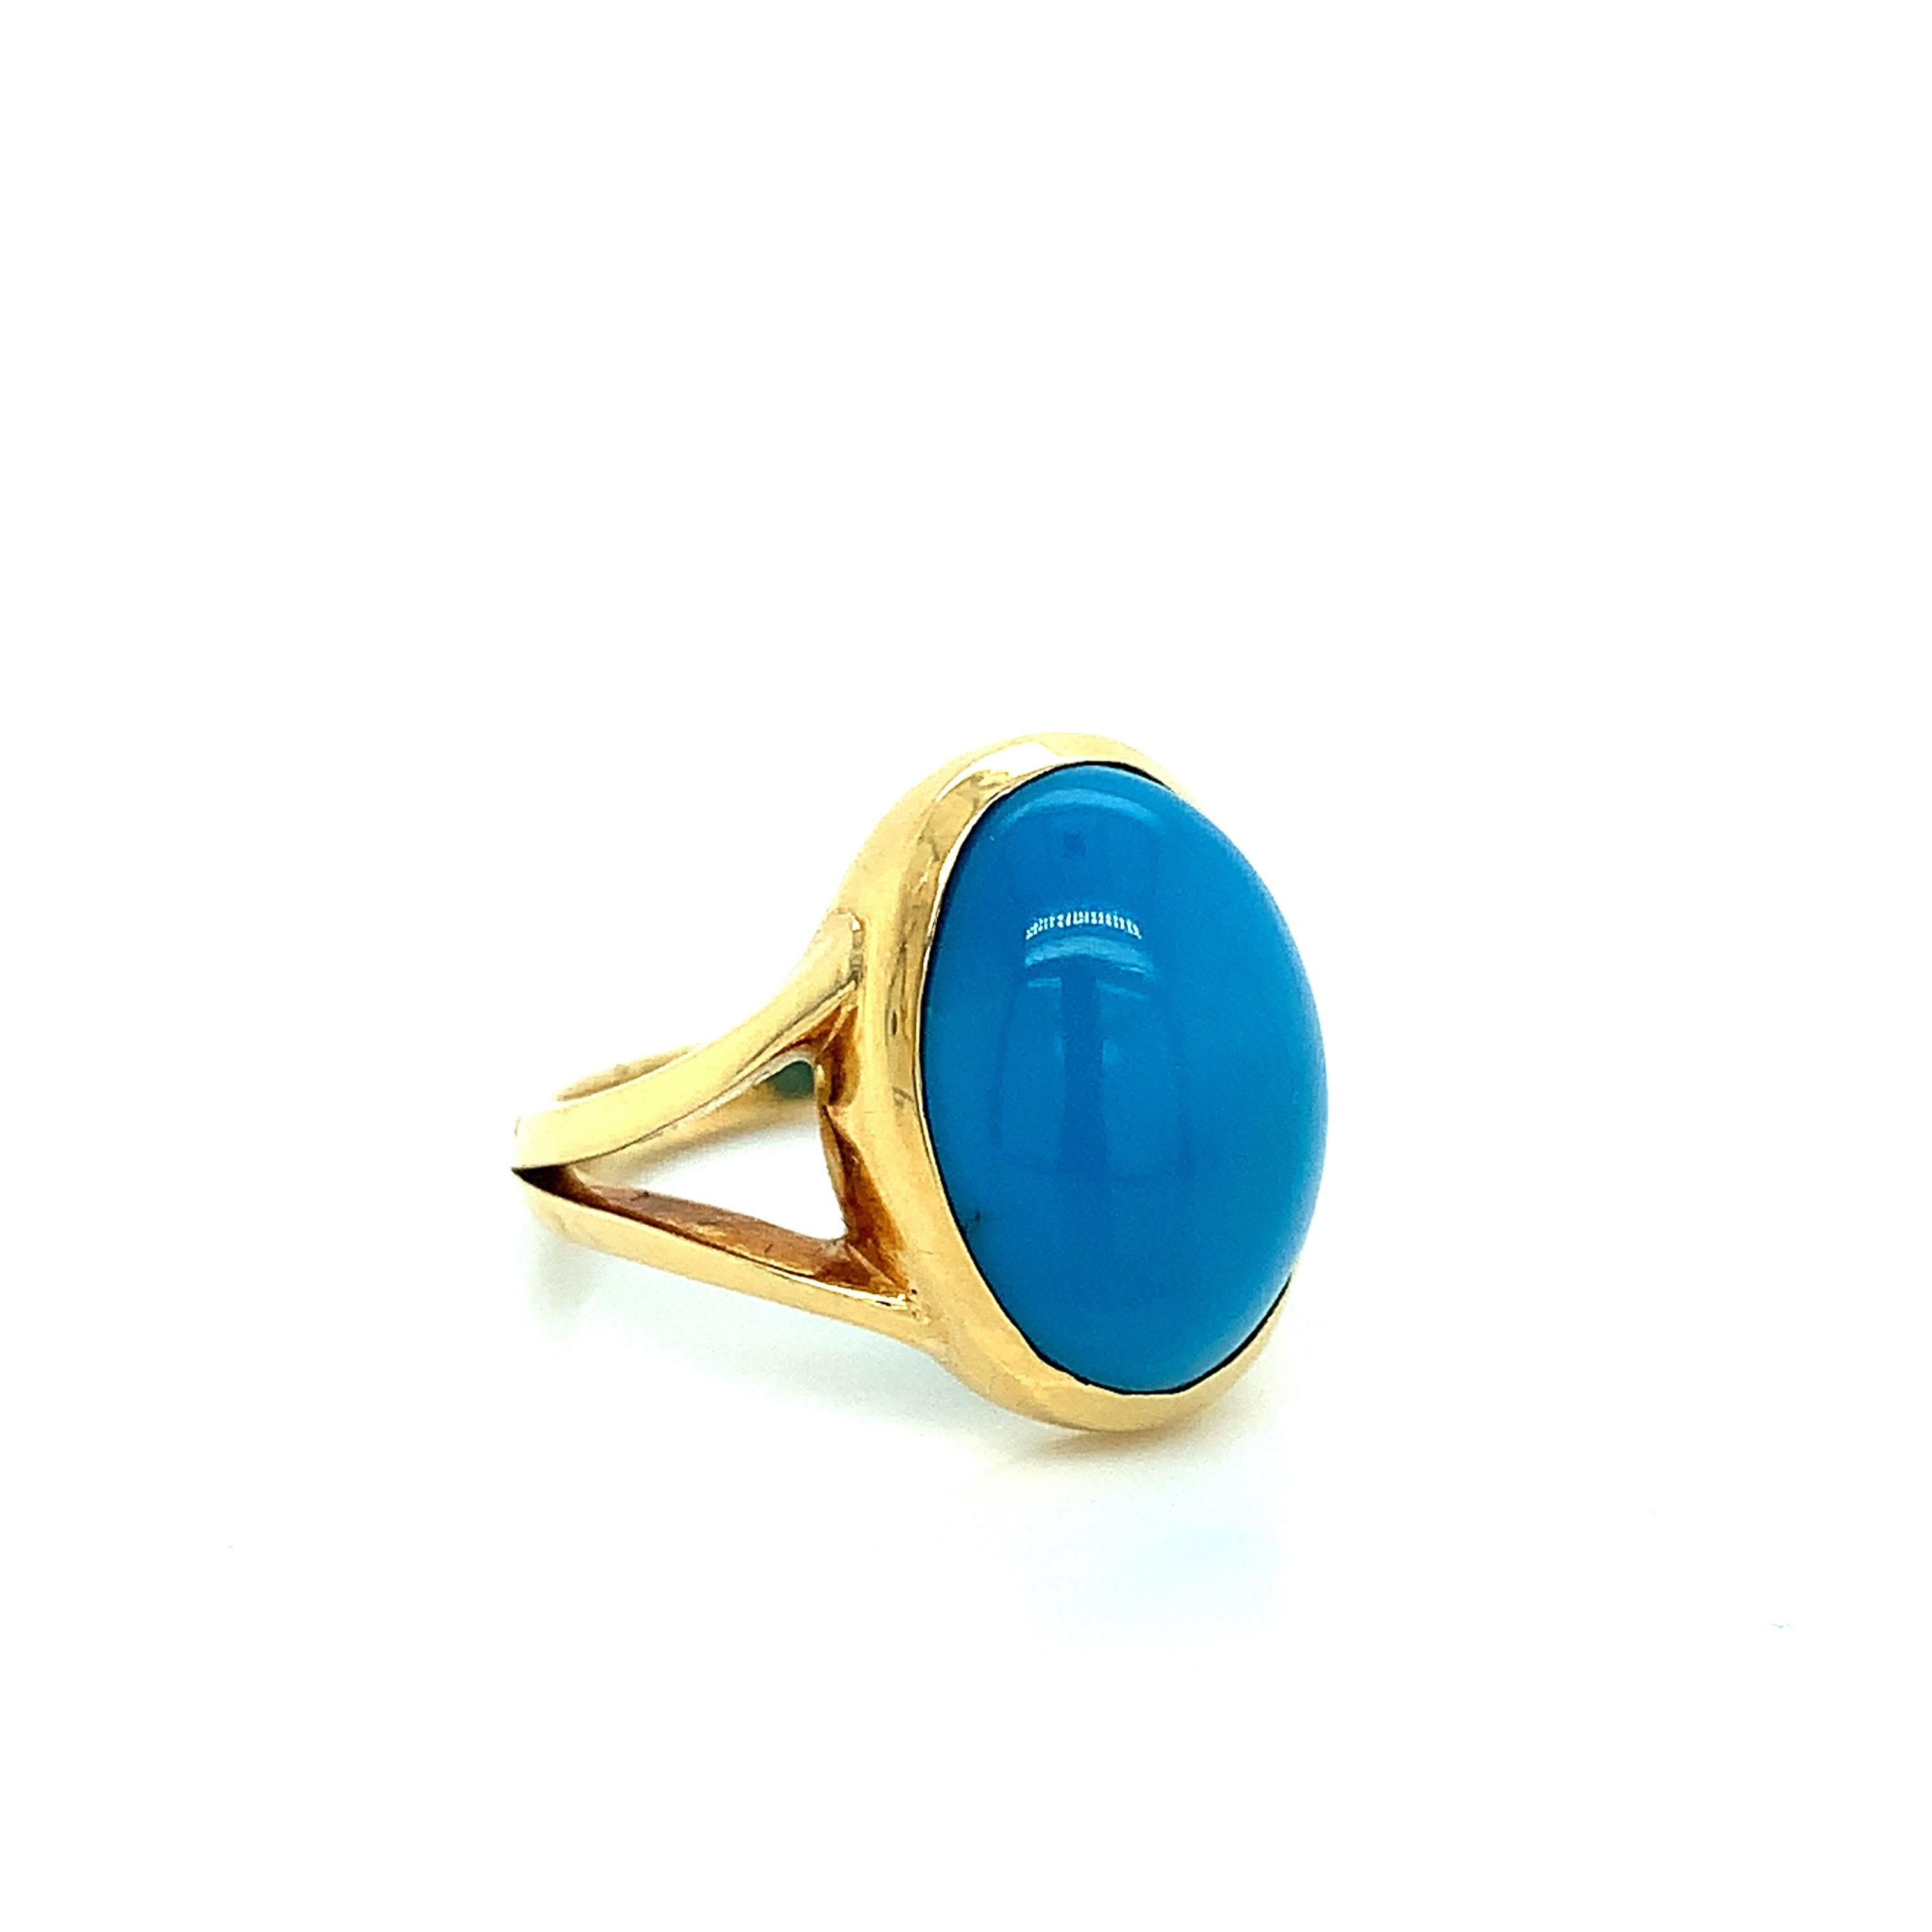 An 18 karat yellow gold band with a turquoise stone. Marked 750. Stone measurements: width 1.1 cm, length 1.6 cm. Total weight: 8.6 grams. Size 7. 